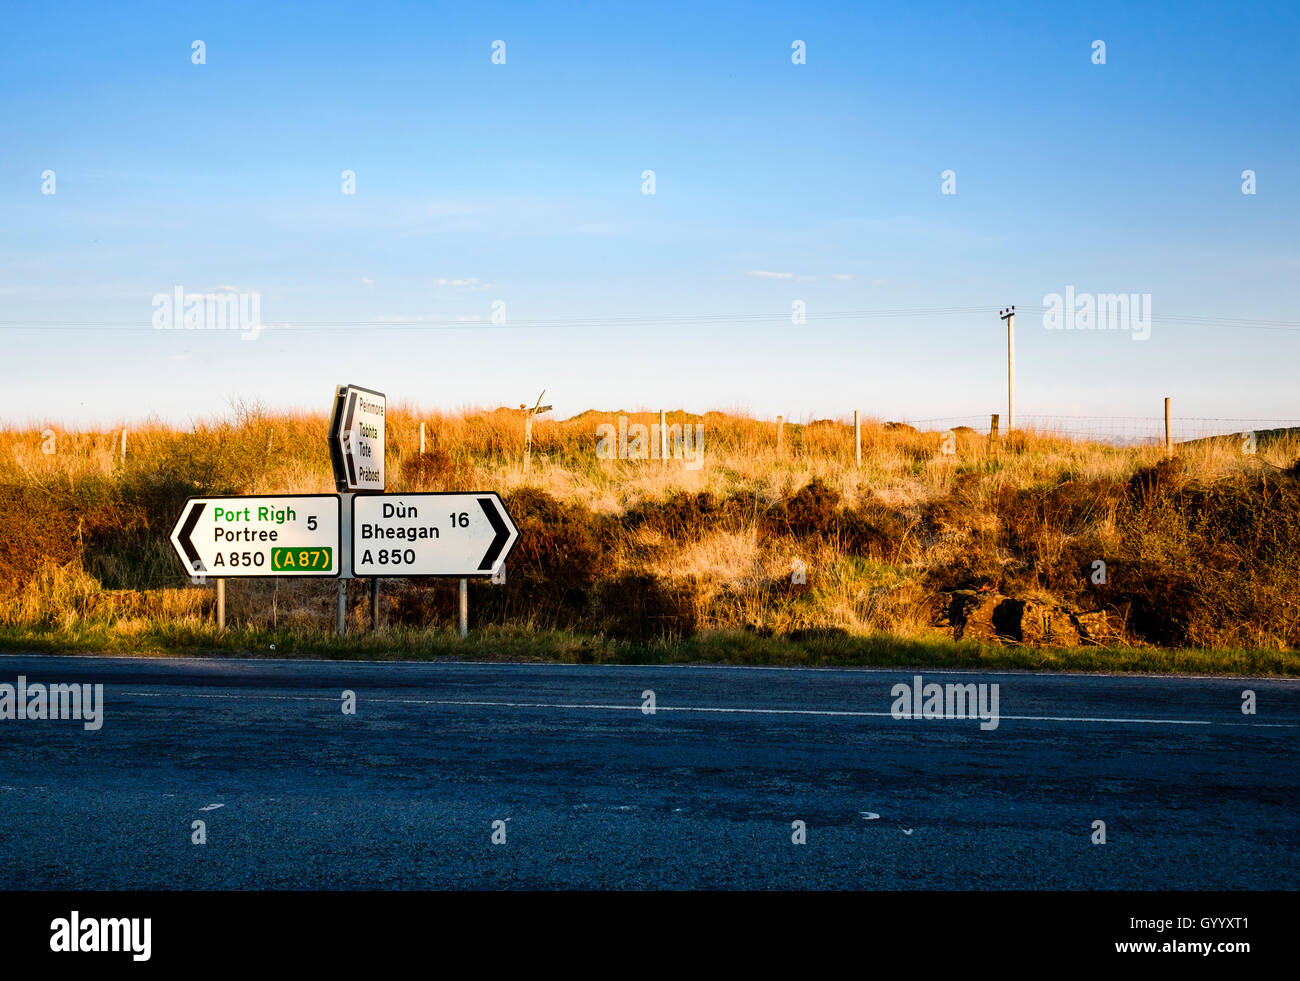 Signpost on a road in the evening light, Skeabost, Isle of Skye, Highland, Scotland, United Kingdom Stock Photo